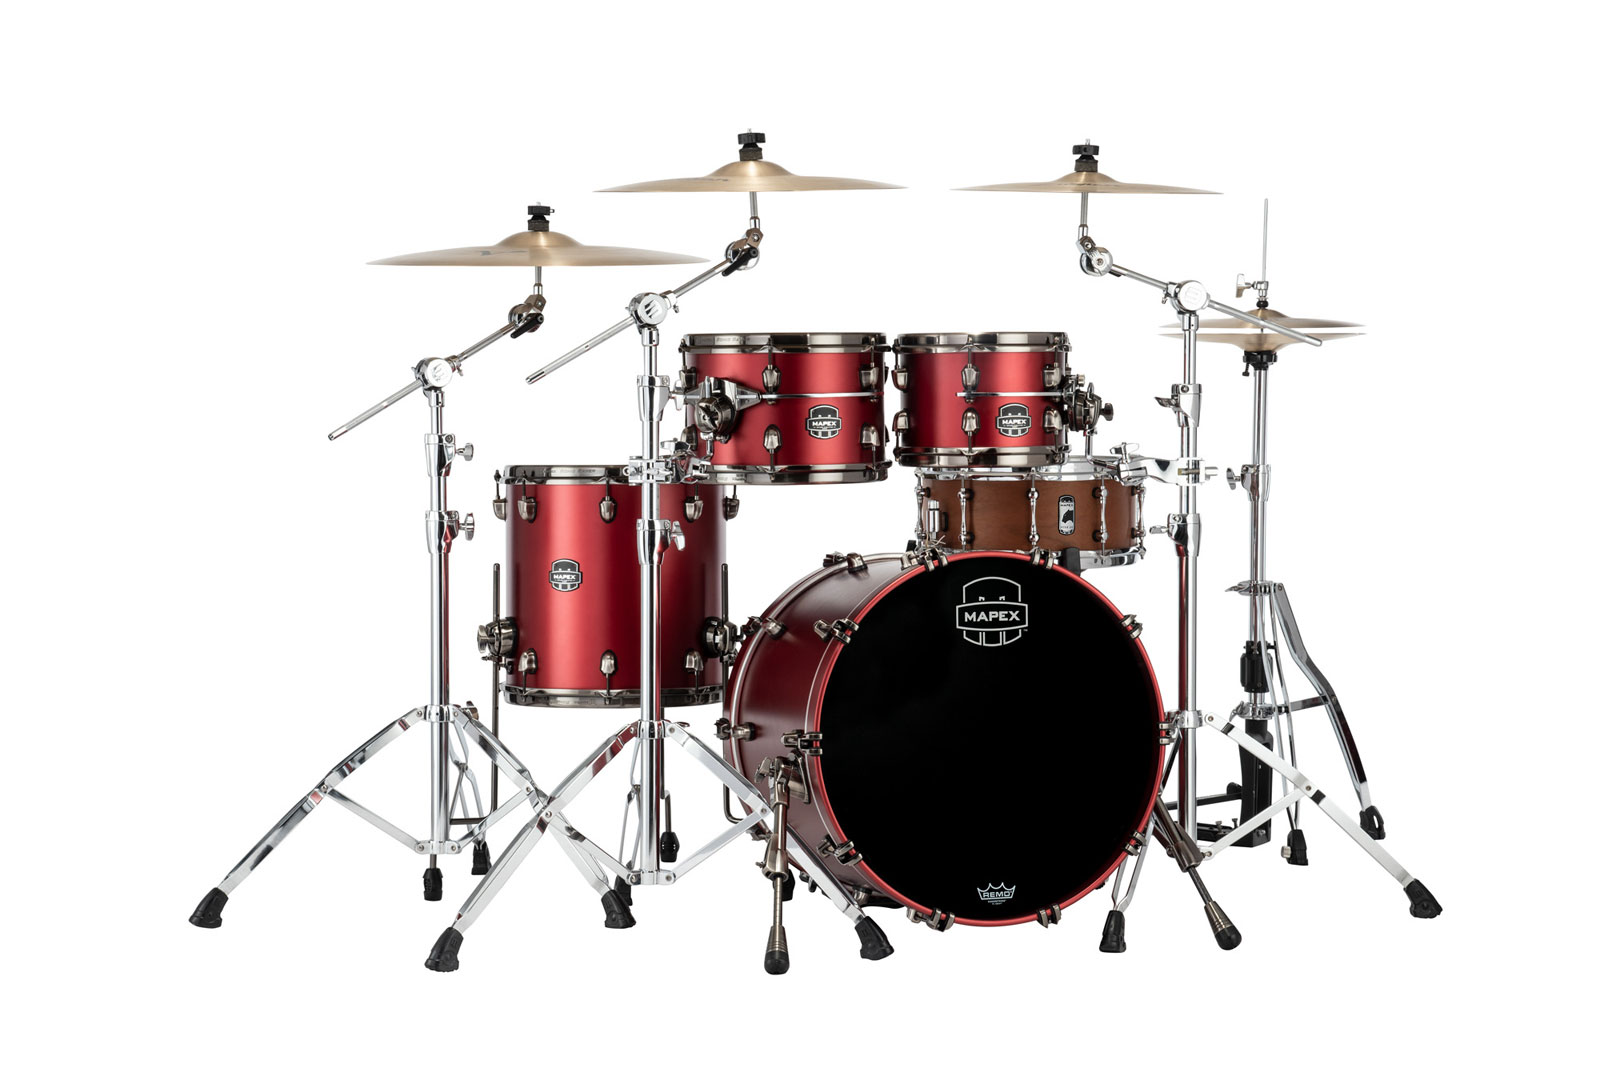 MAPEX SATURN EVO 4 DRUMS TUSCAN RED